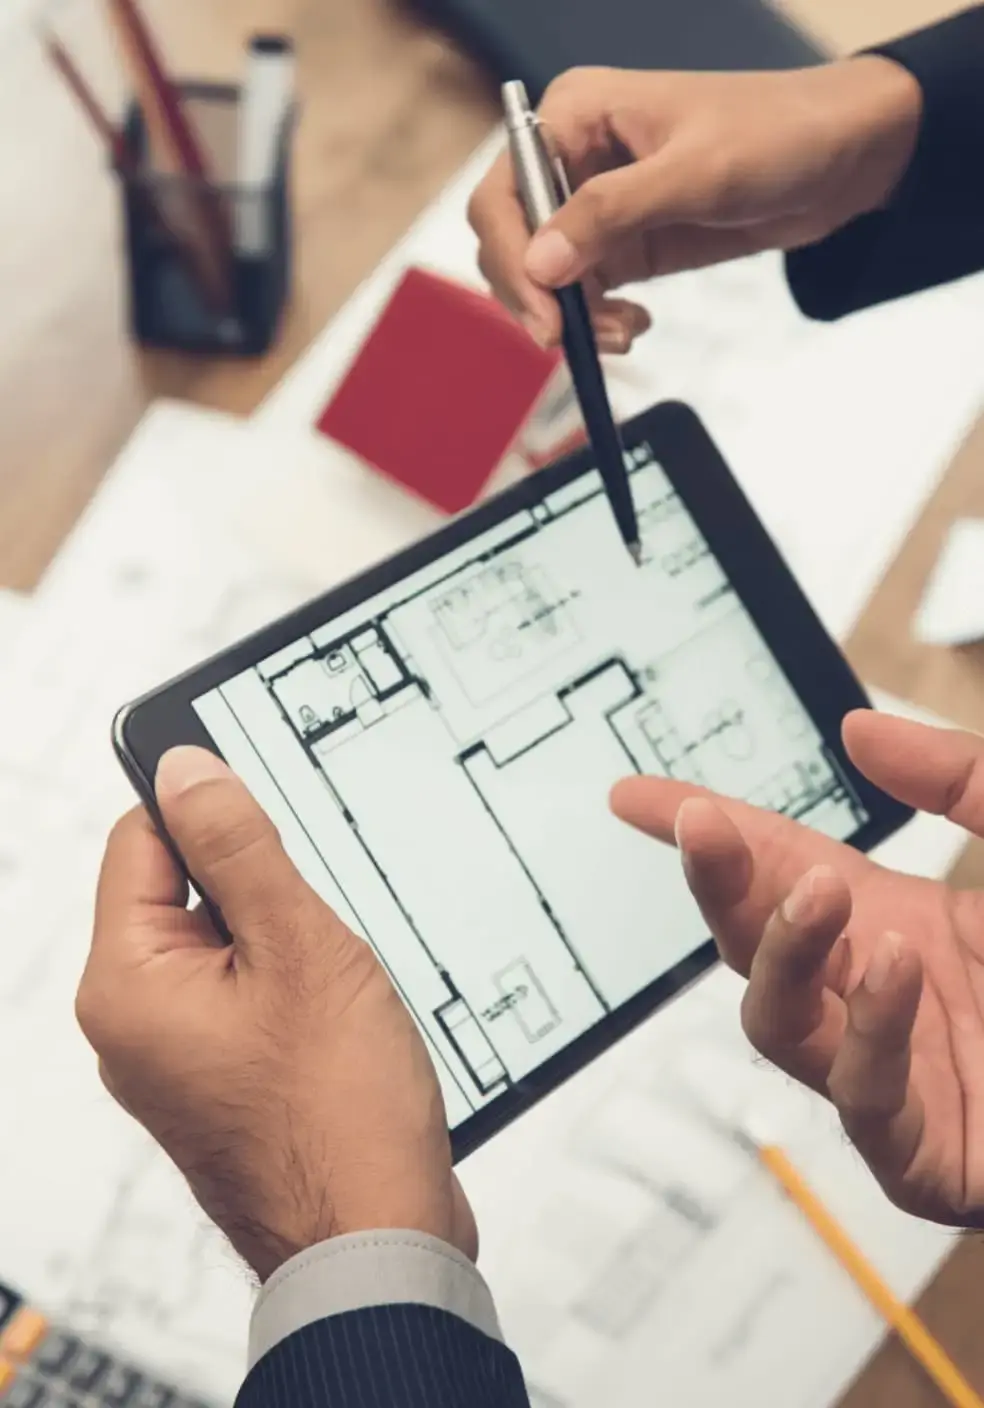 Architects looking a building plan on a tablet